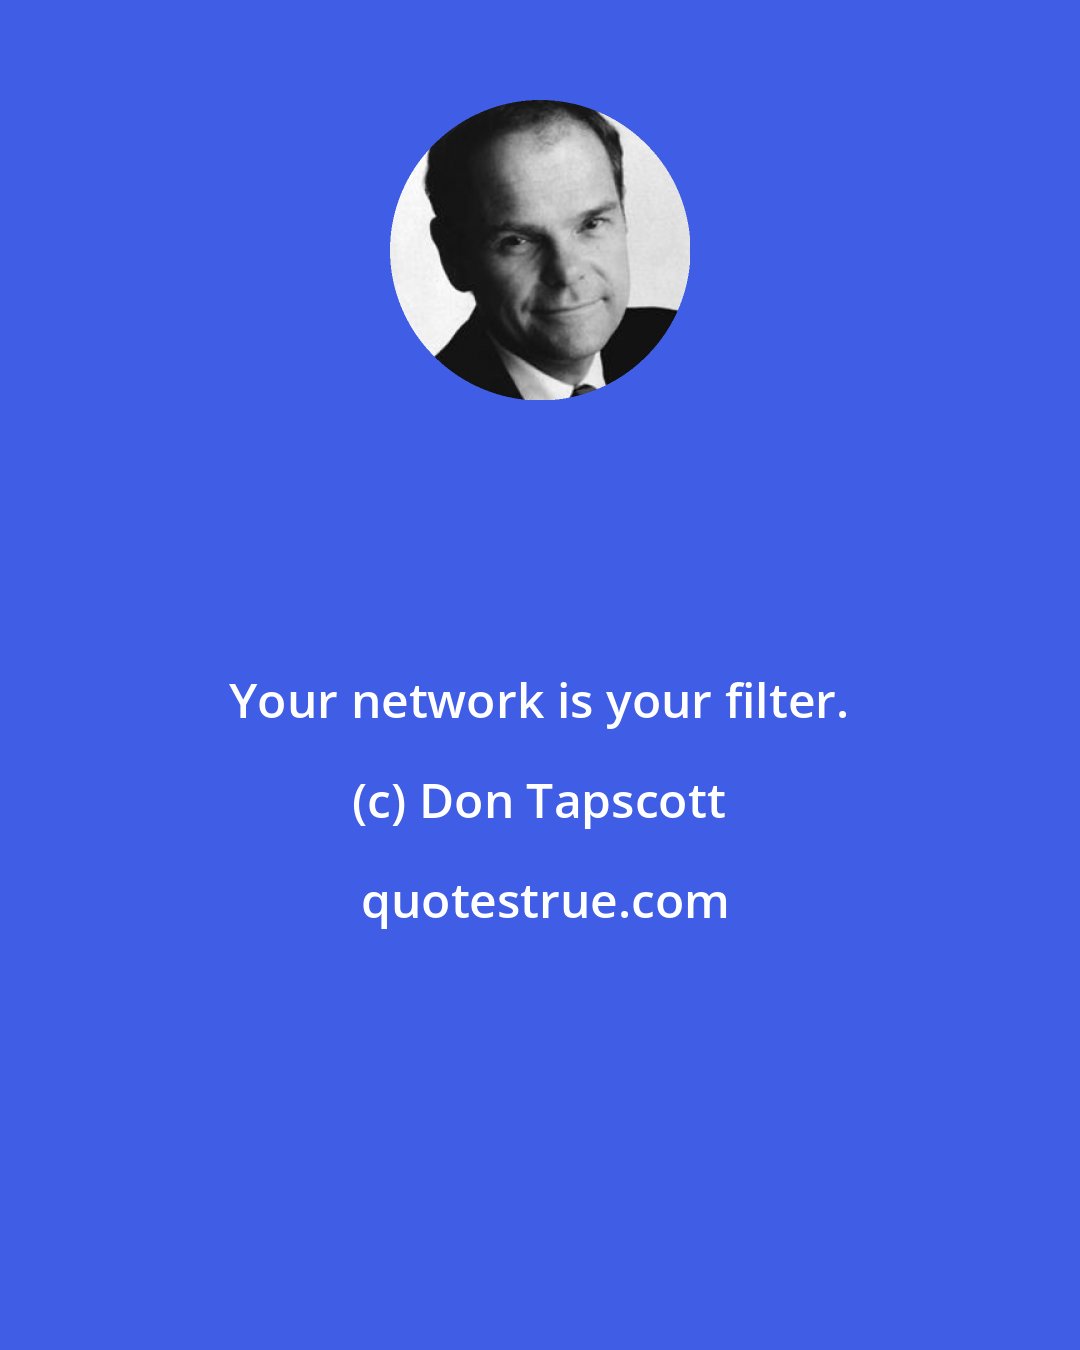 Don Tapscott: Your network is your filter.